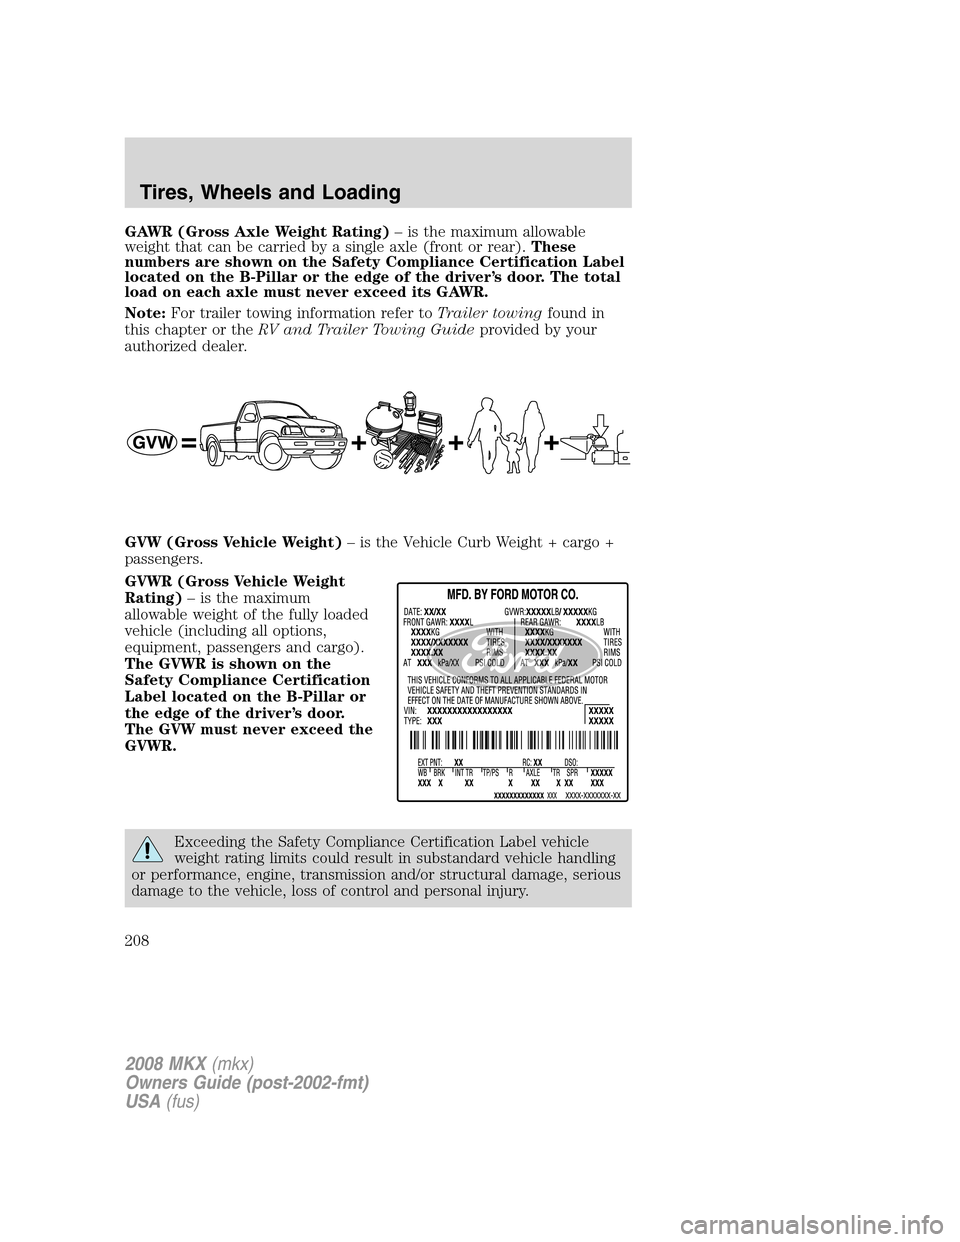 LINCOLN MKX 2008 Owners Guide GAWR (Gross Axle Weight Rating)– is the maximum allowable
weight that can be carried by a single axle (front or rear).These
numbers are shown on the Safety Compliance Certification Label
located on 